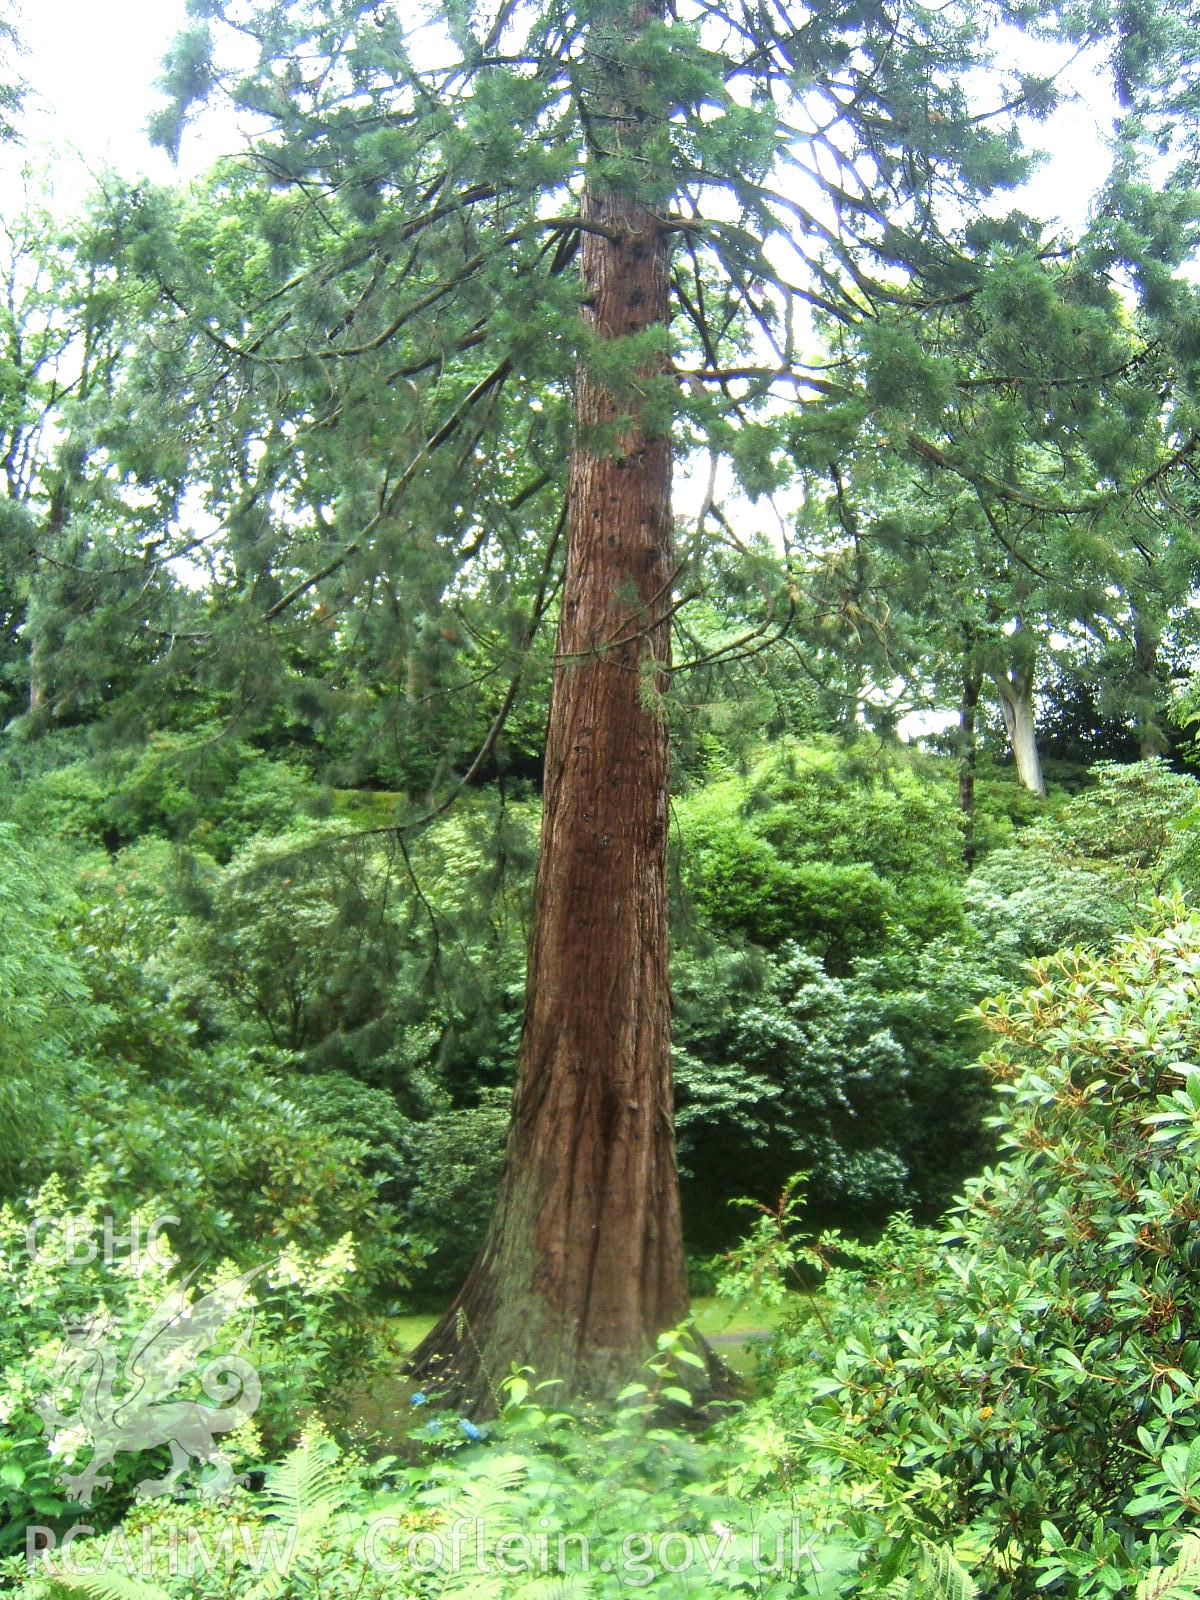 Blue Cedar or Cedrus atlantica 'Glauca' 38.4m (126ft) tall at north-east end of The Dell from the S.W.